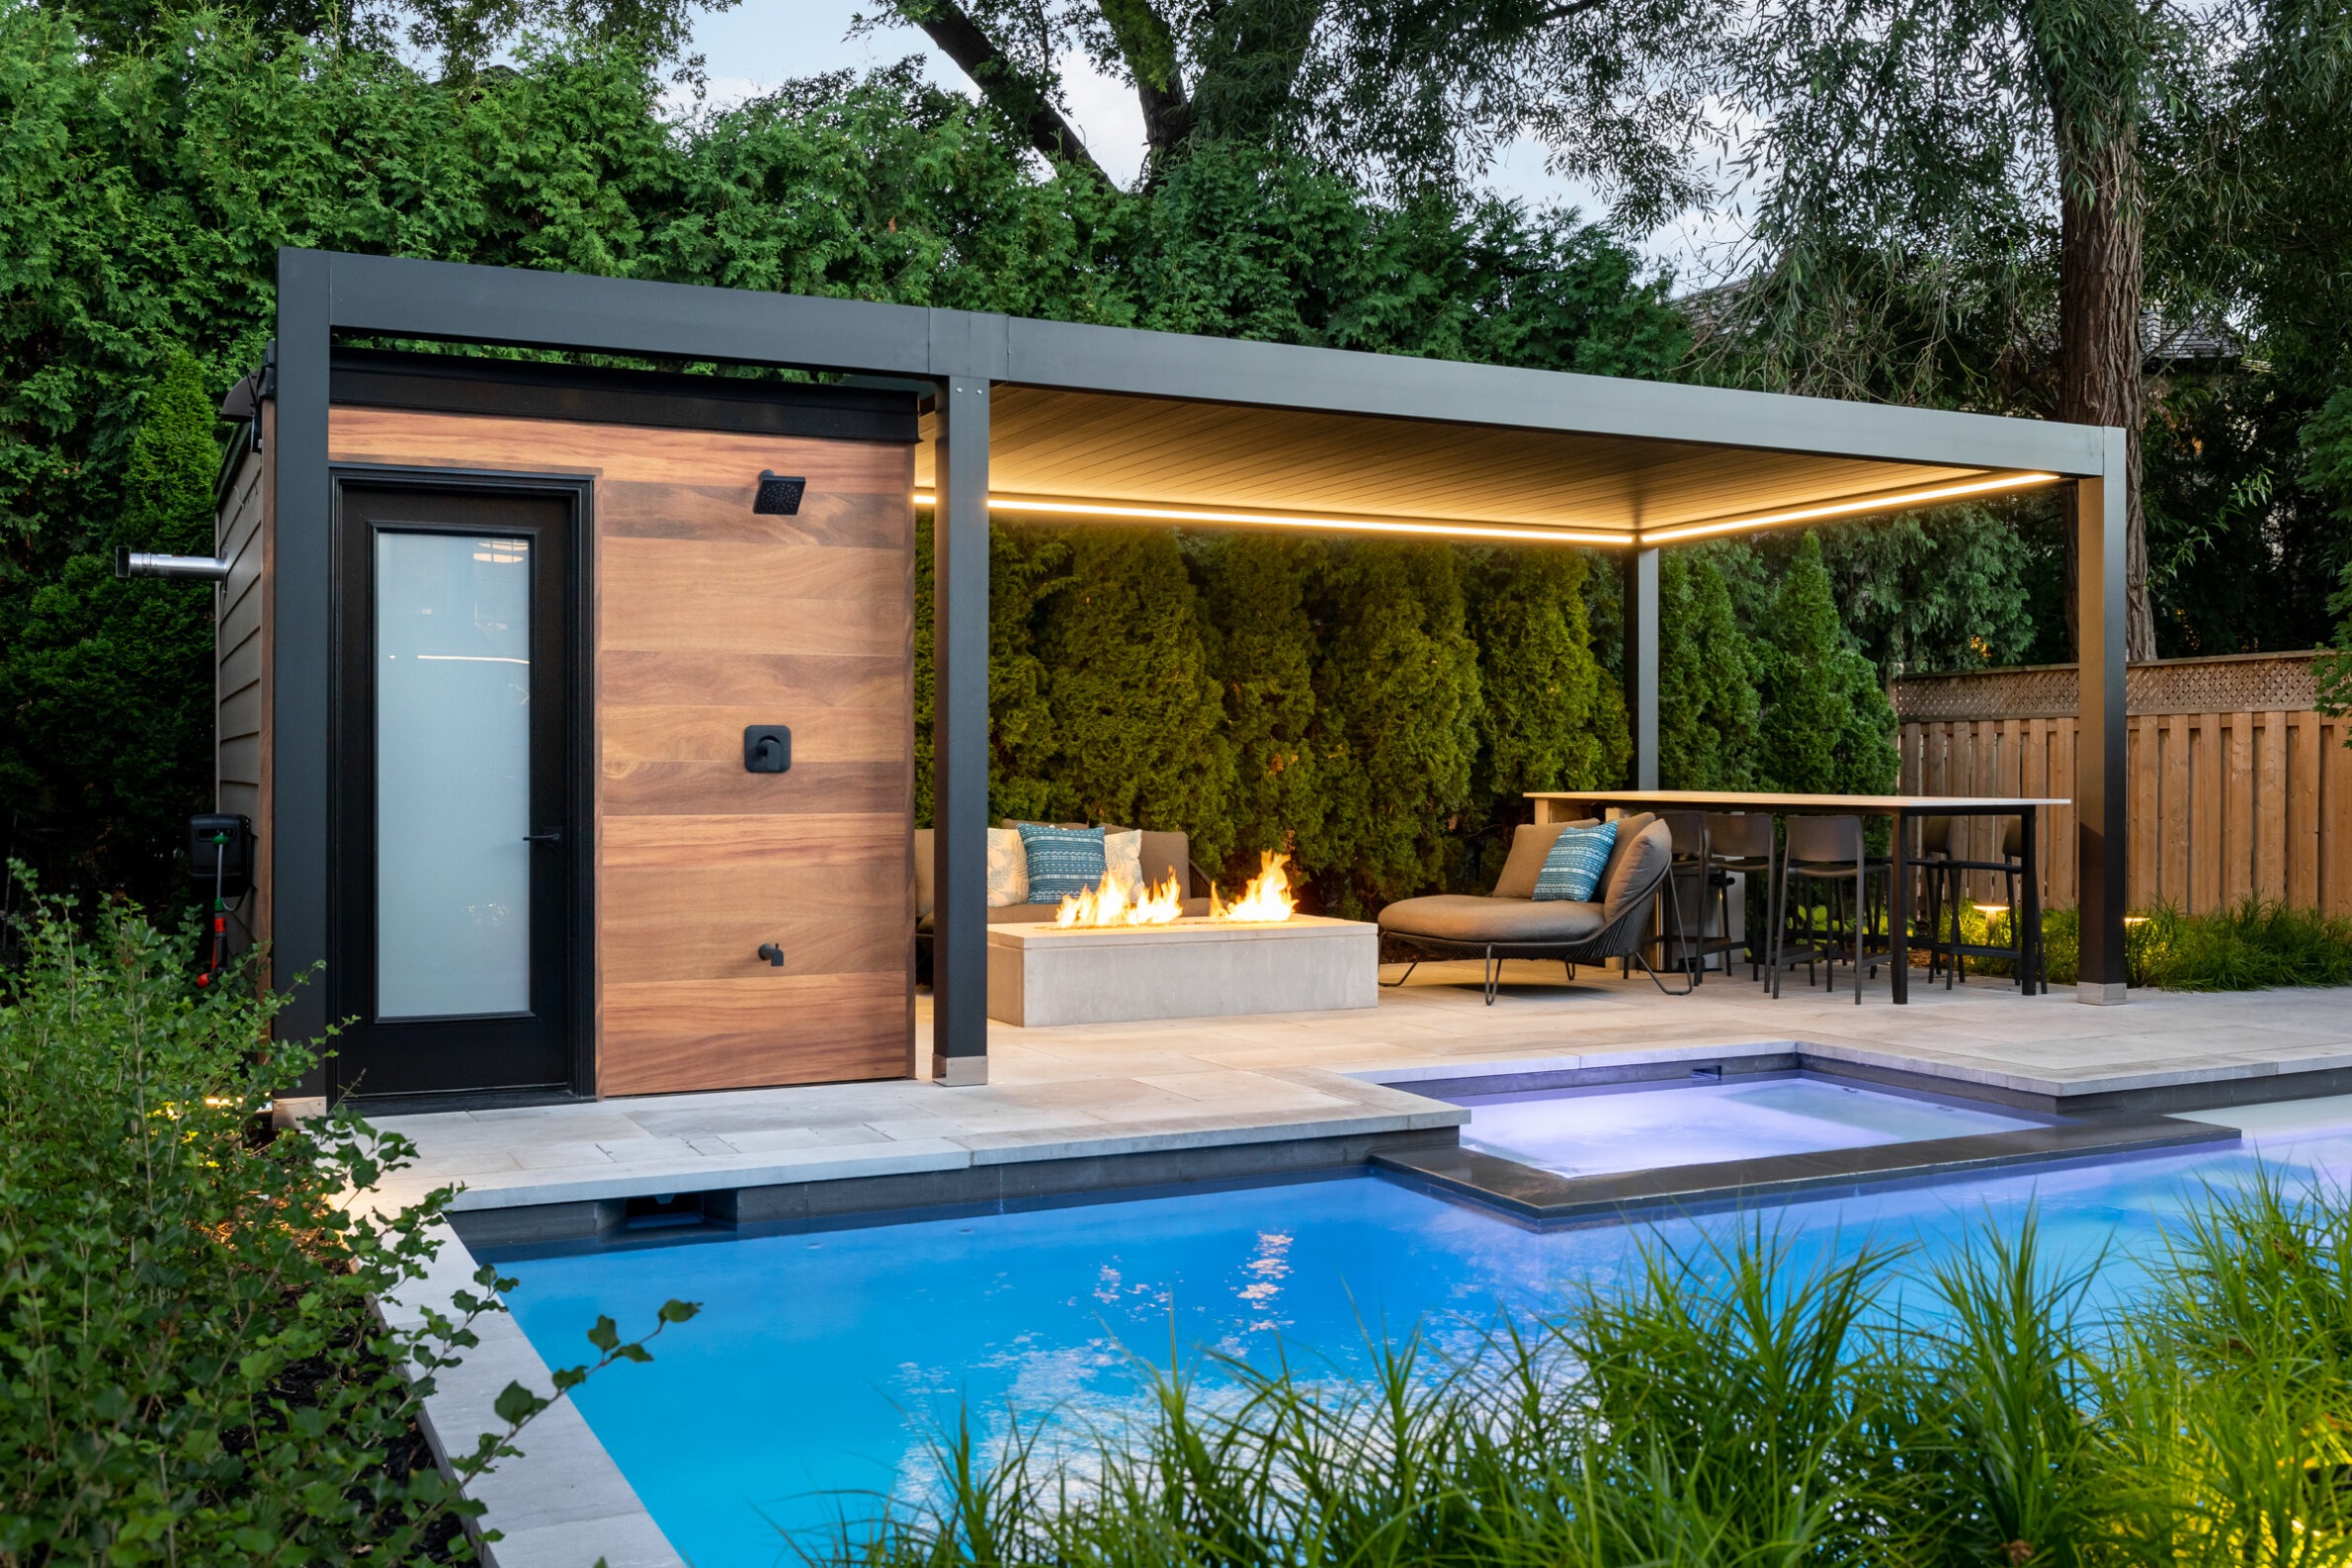 A modern backyard with a swimming pool, covered patio area with a fireplace, lounging furniture, dining set, and lush greenery during the evening.